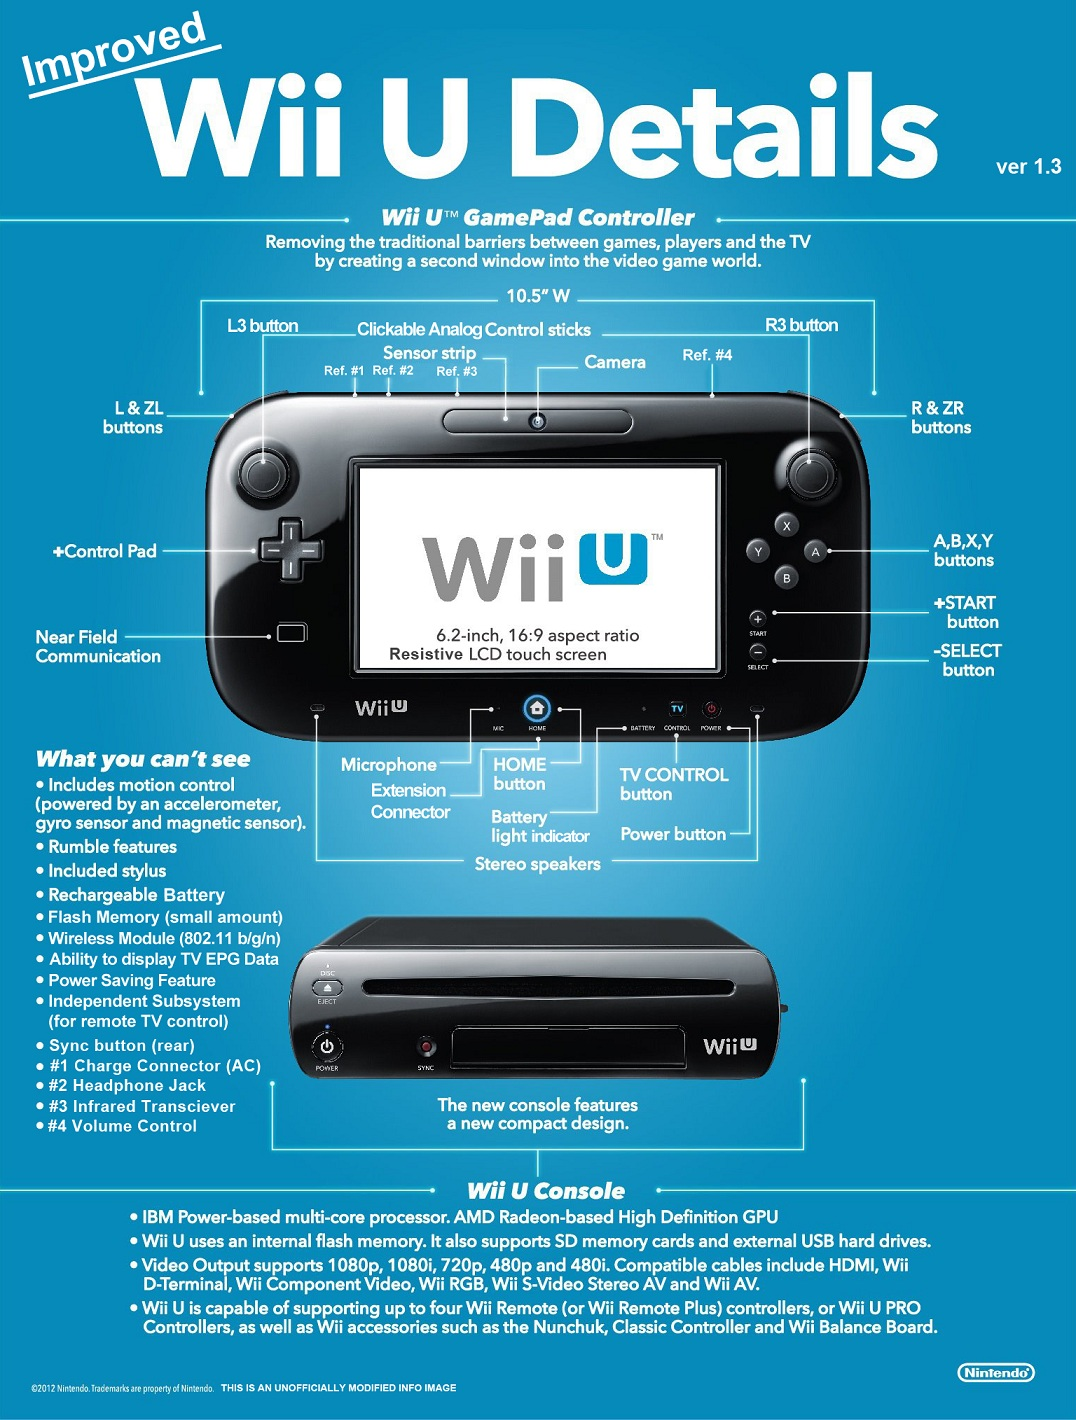 Koningin Banyan Verlichting Everything you need know about the Wii U | Ars Technica